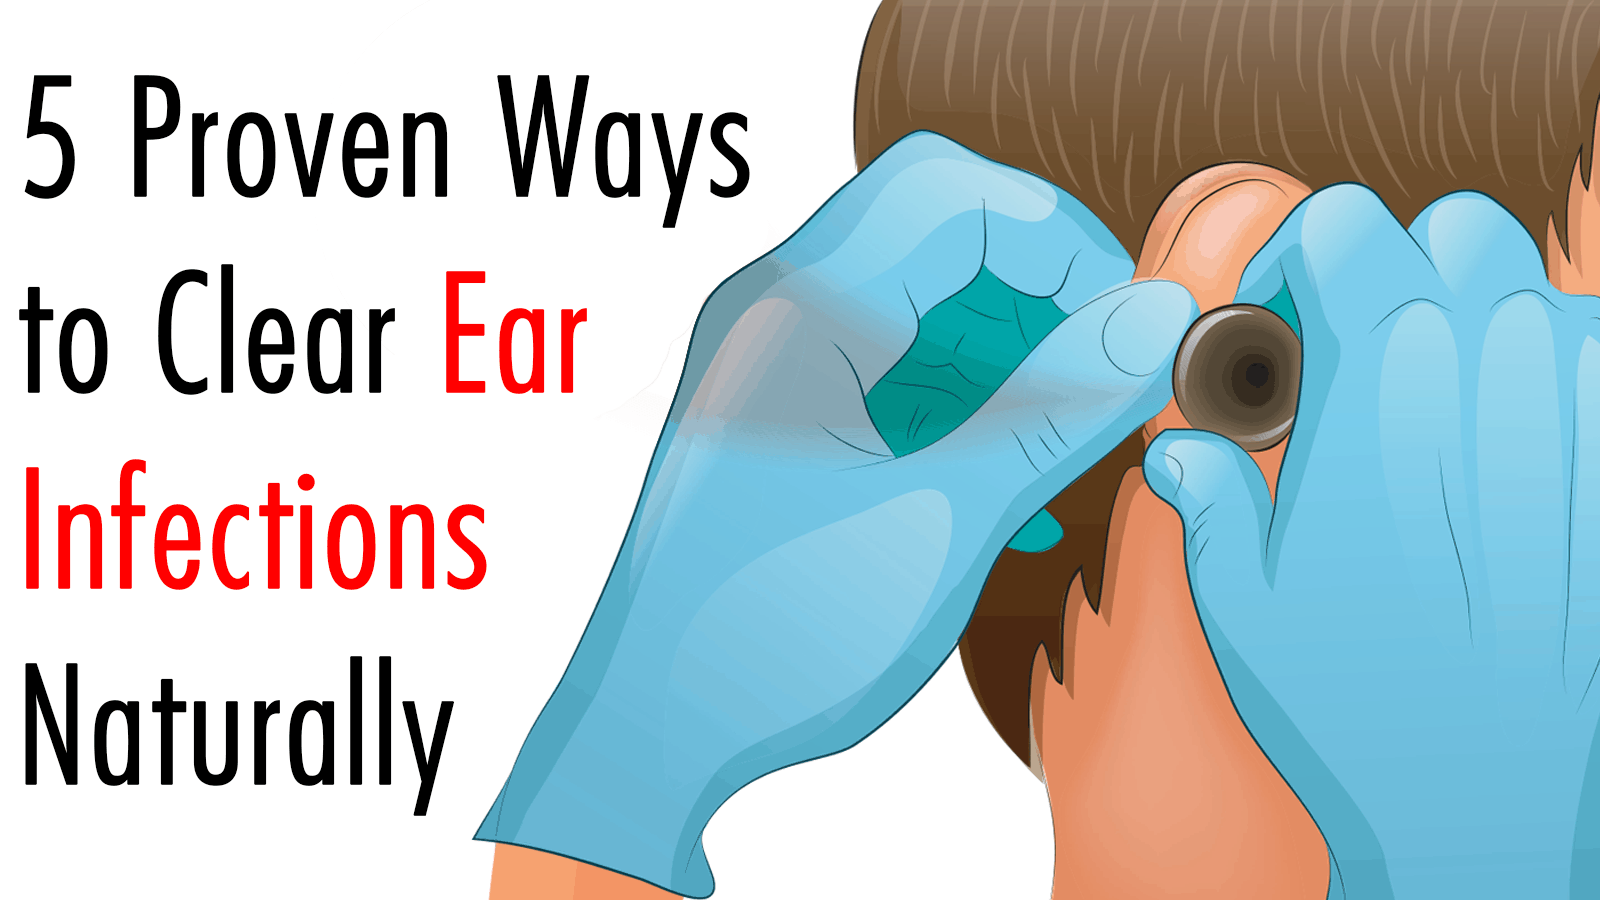 5 Proven Ways to Clear Ear Infections Naturally